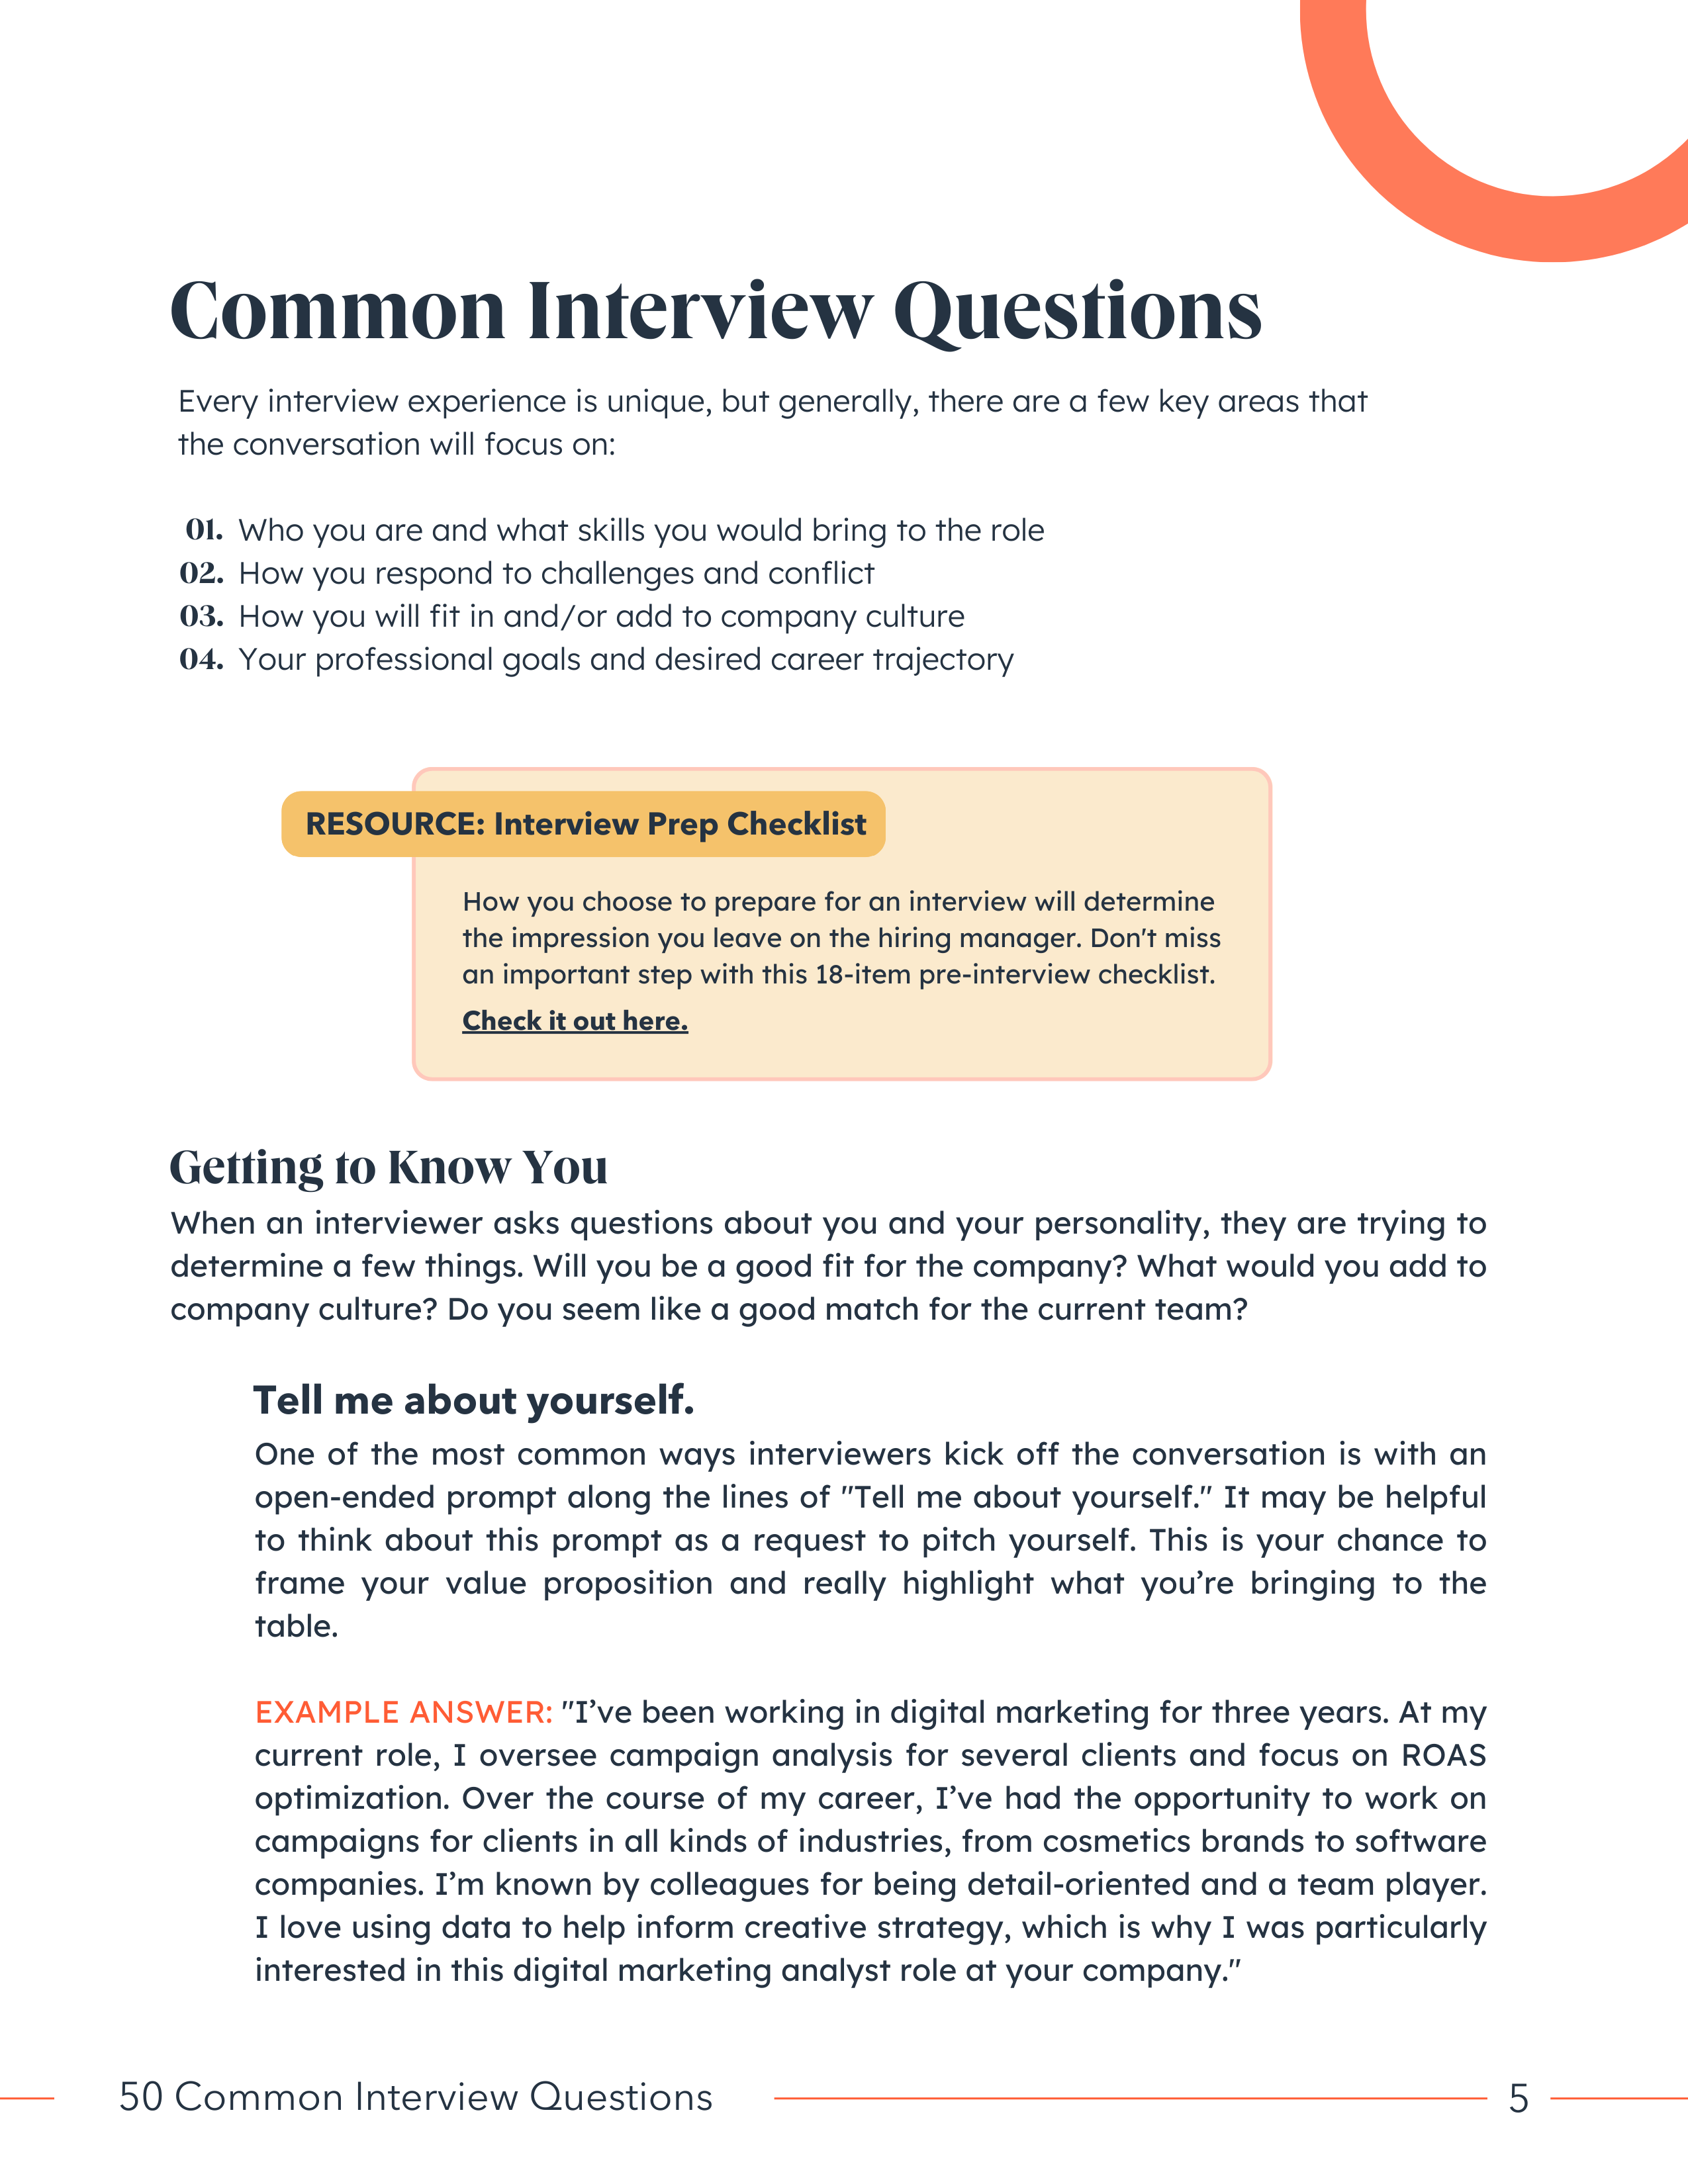 eBook - 50 Common Interview Questions (3)